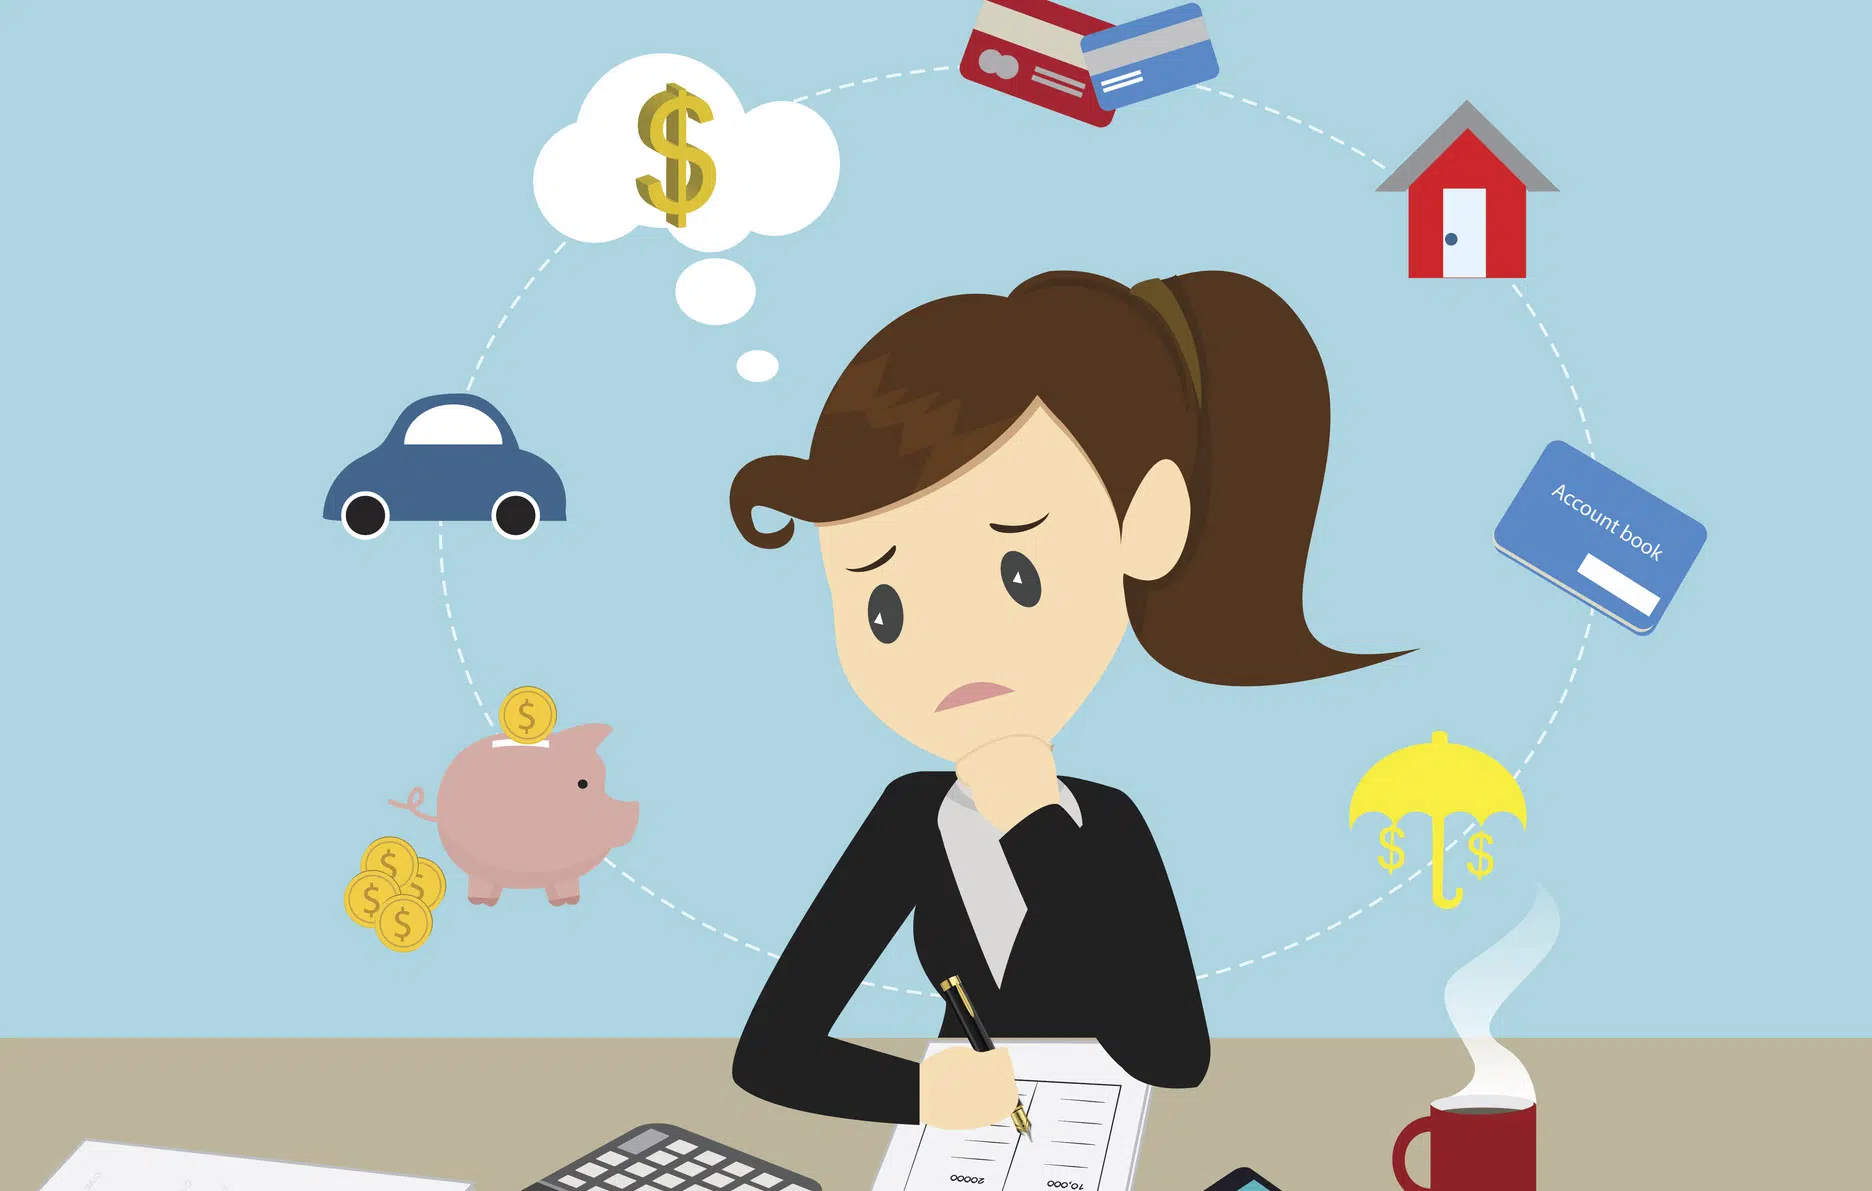 Graphic shows female stressed with financial worries